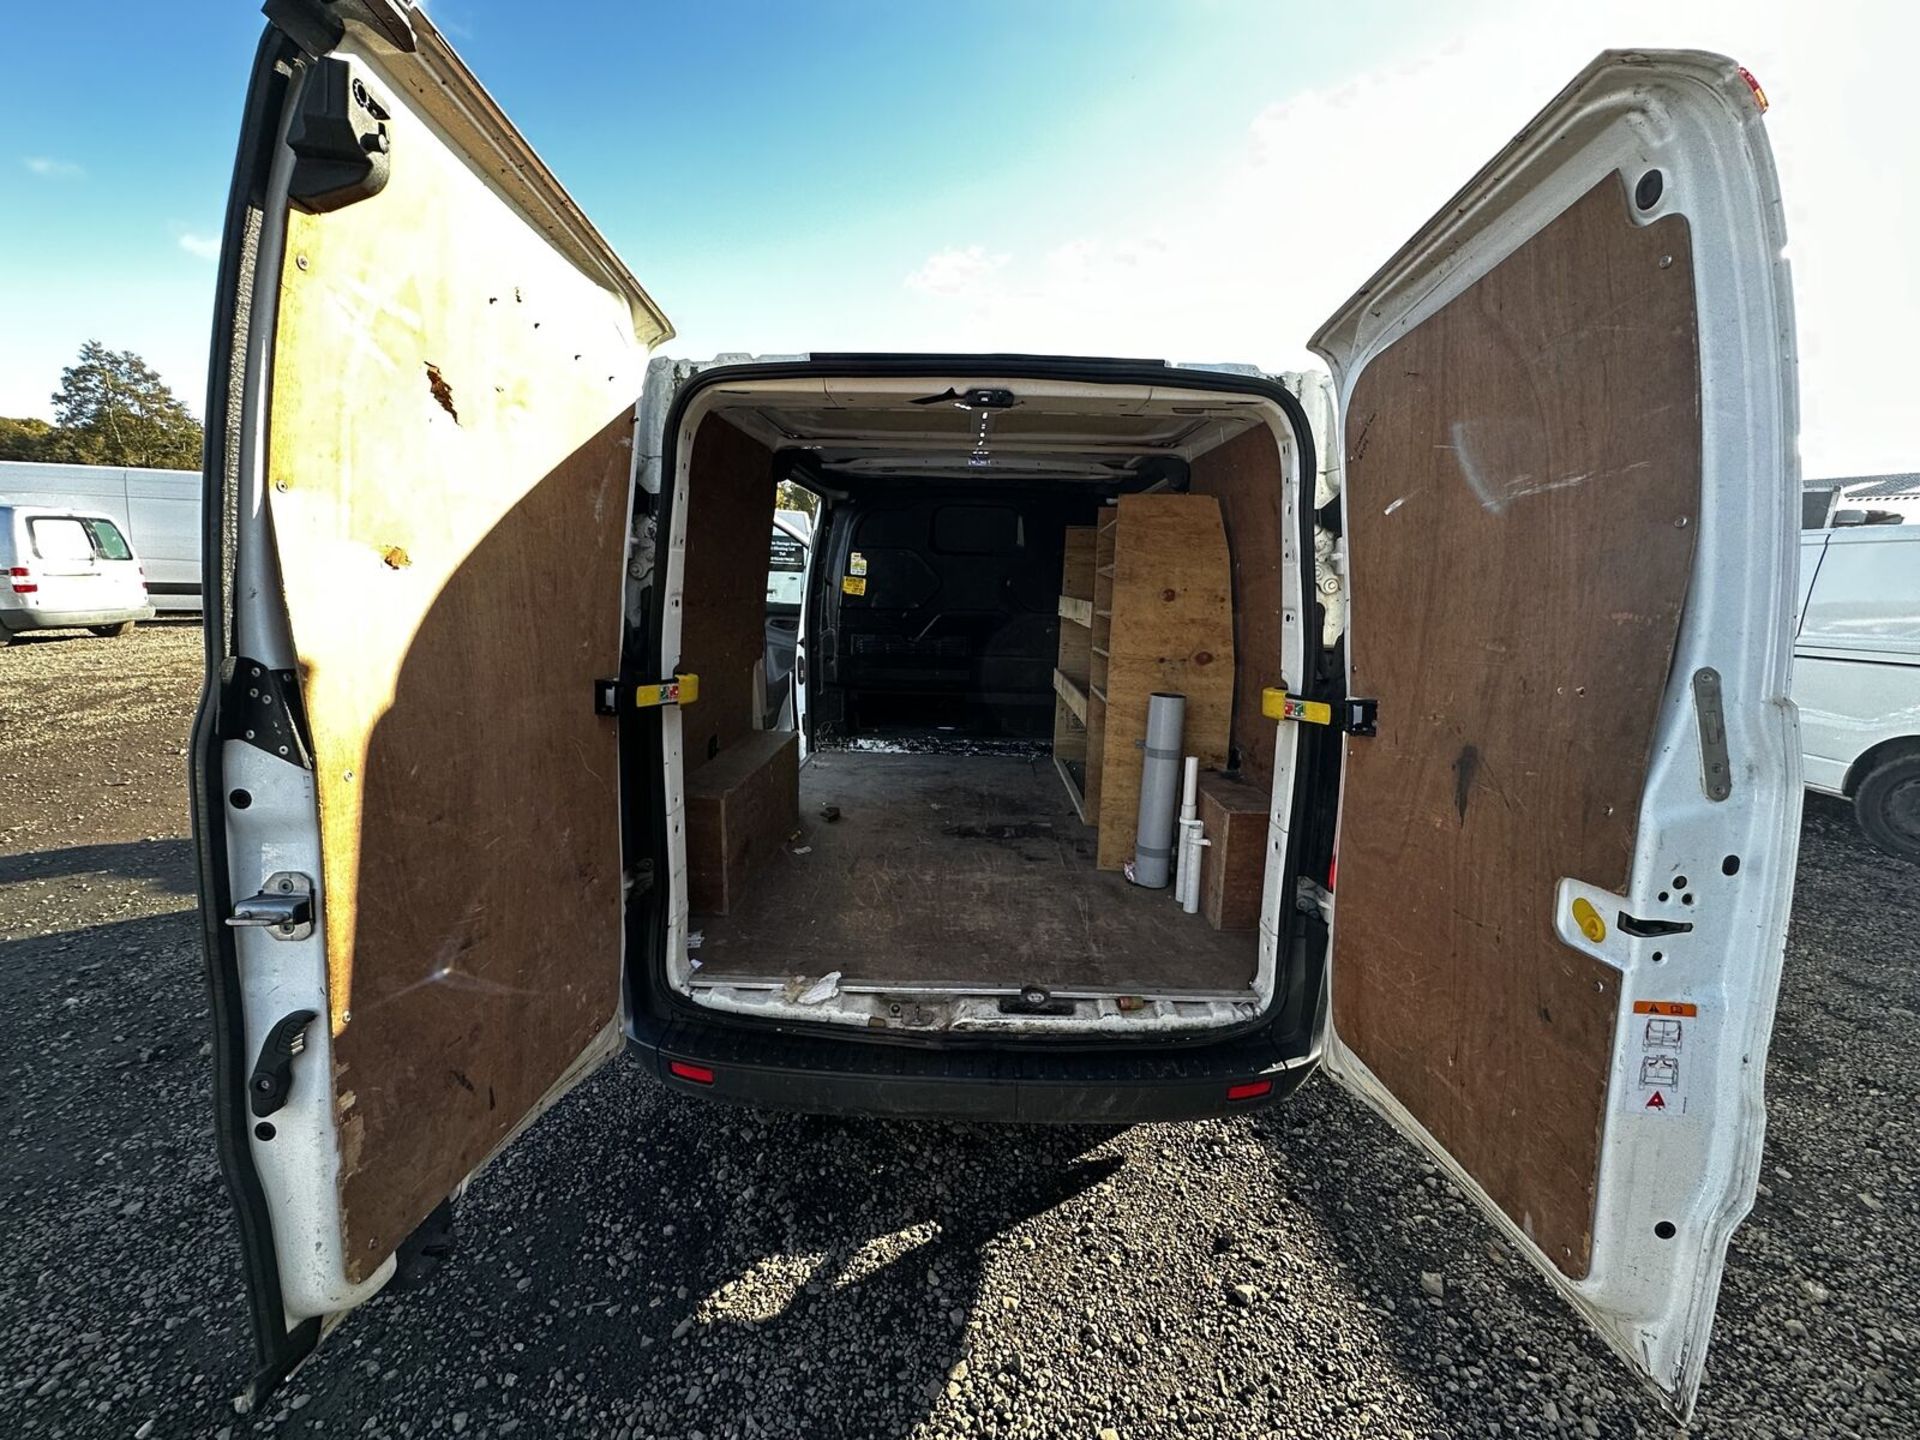 AFFORDABLE WORKHORSE: 2014 FORD TRANSIT CUSTOM 270 L1 LOW ROOF - Image 2 of 15